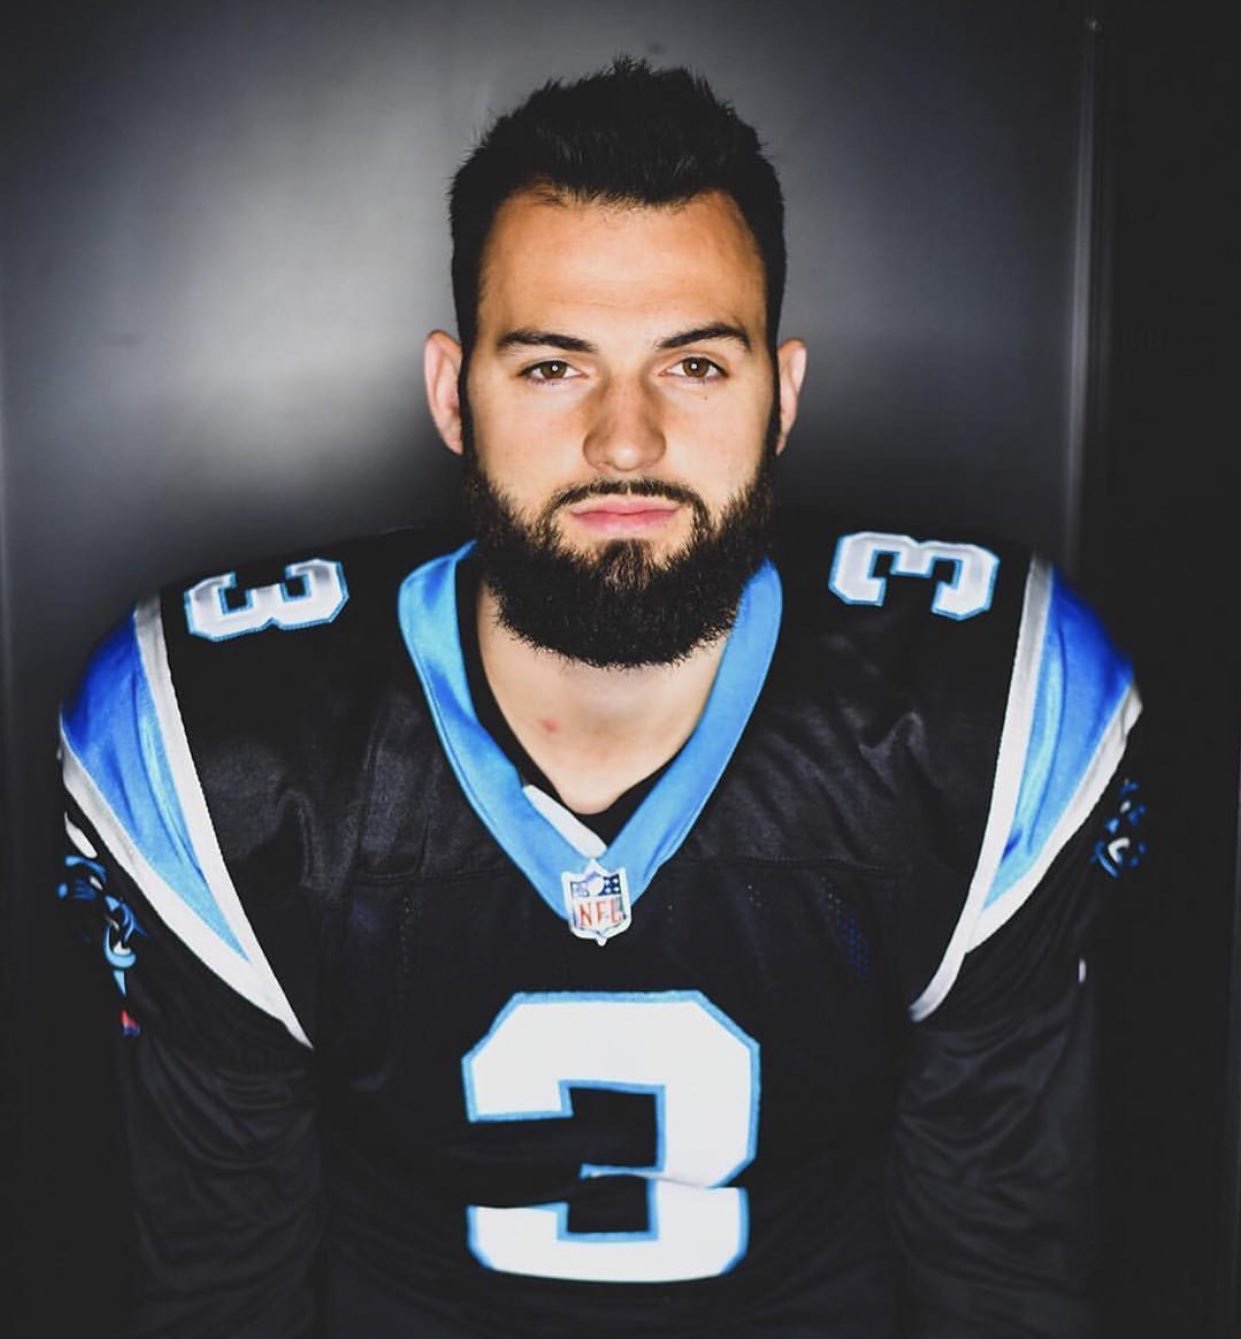 will grier jersey panthers